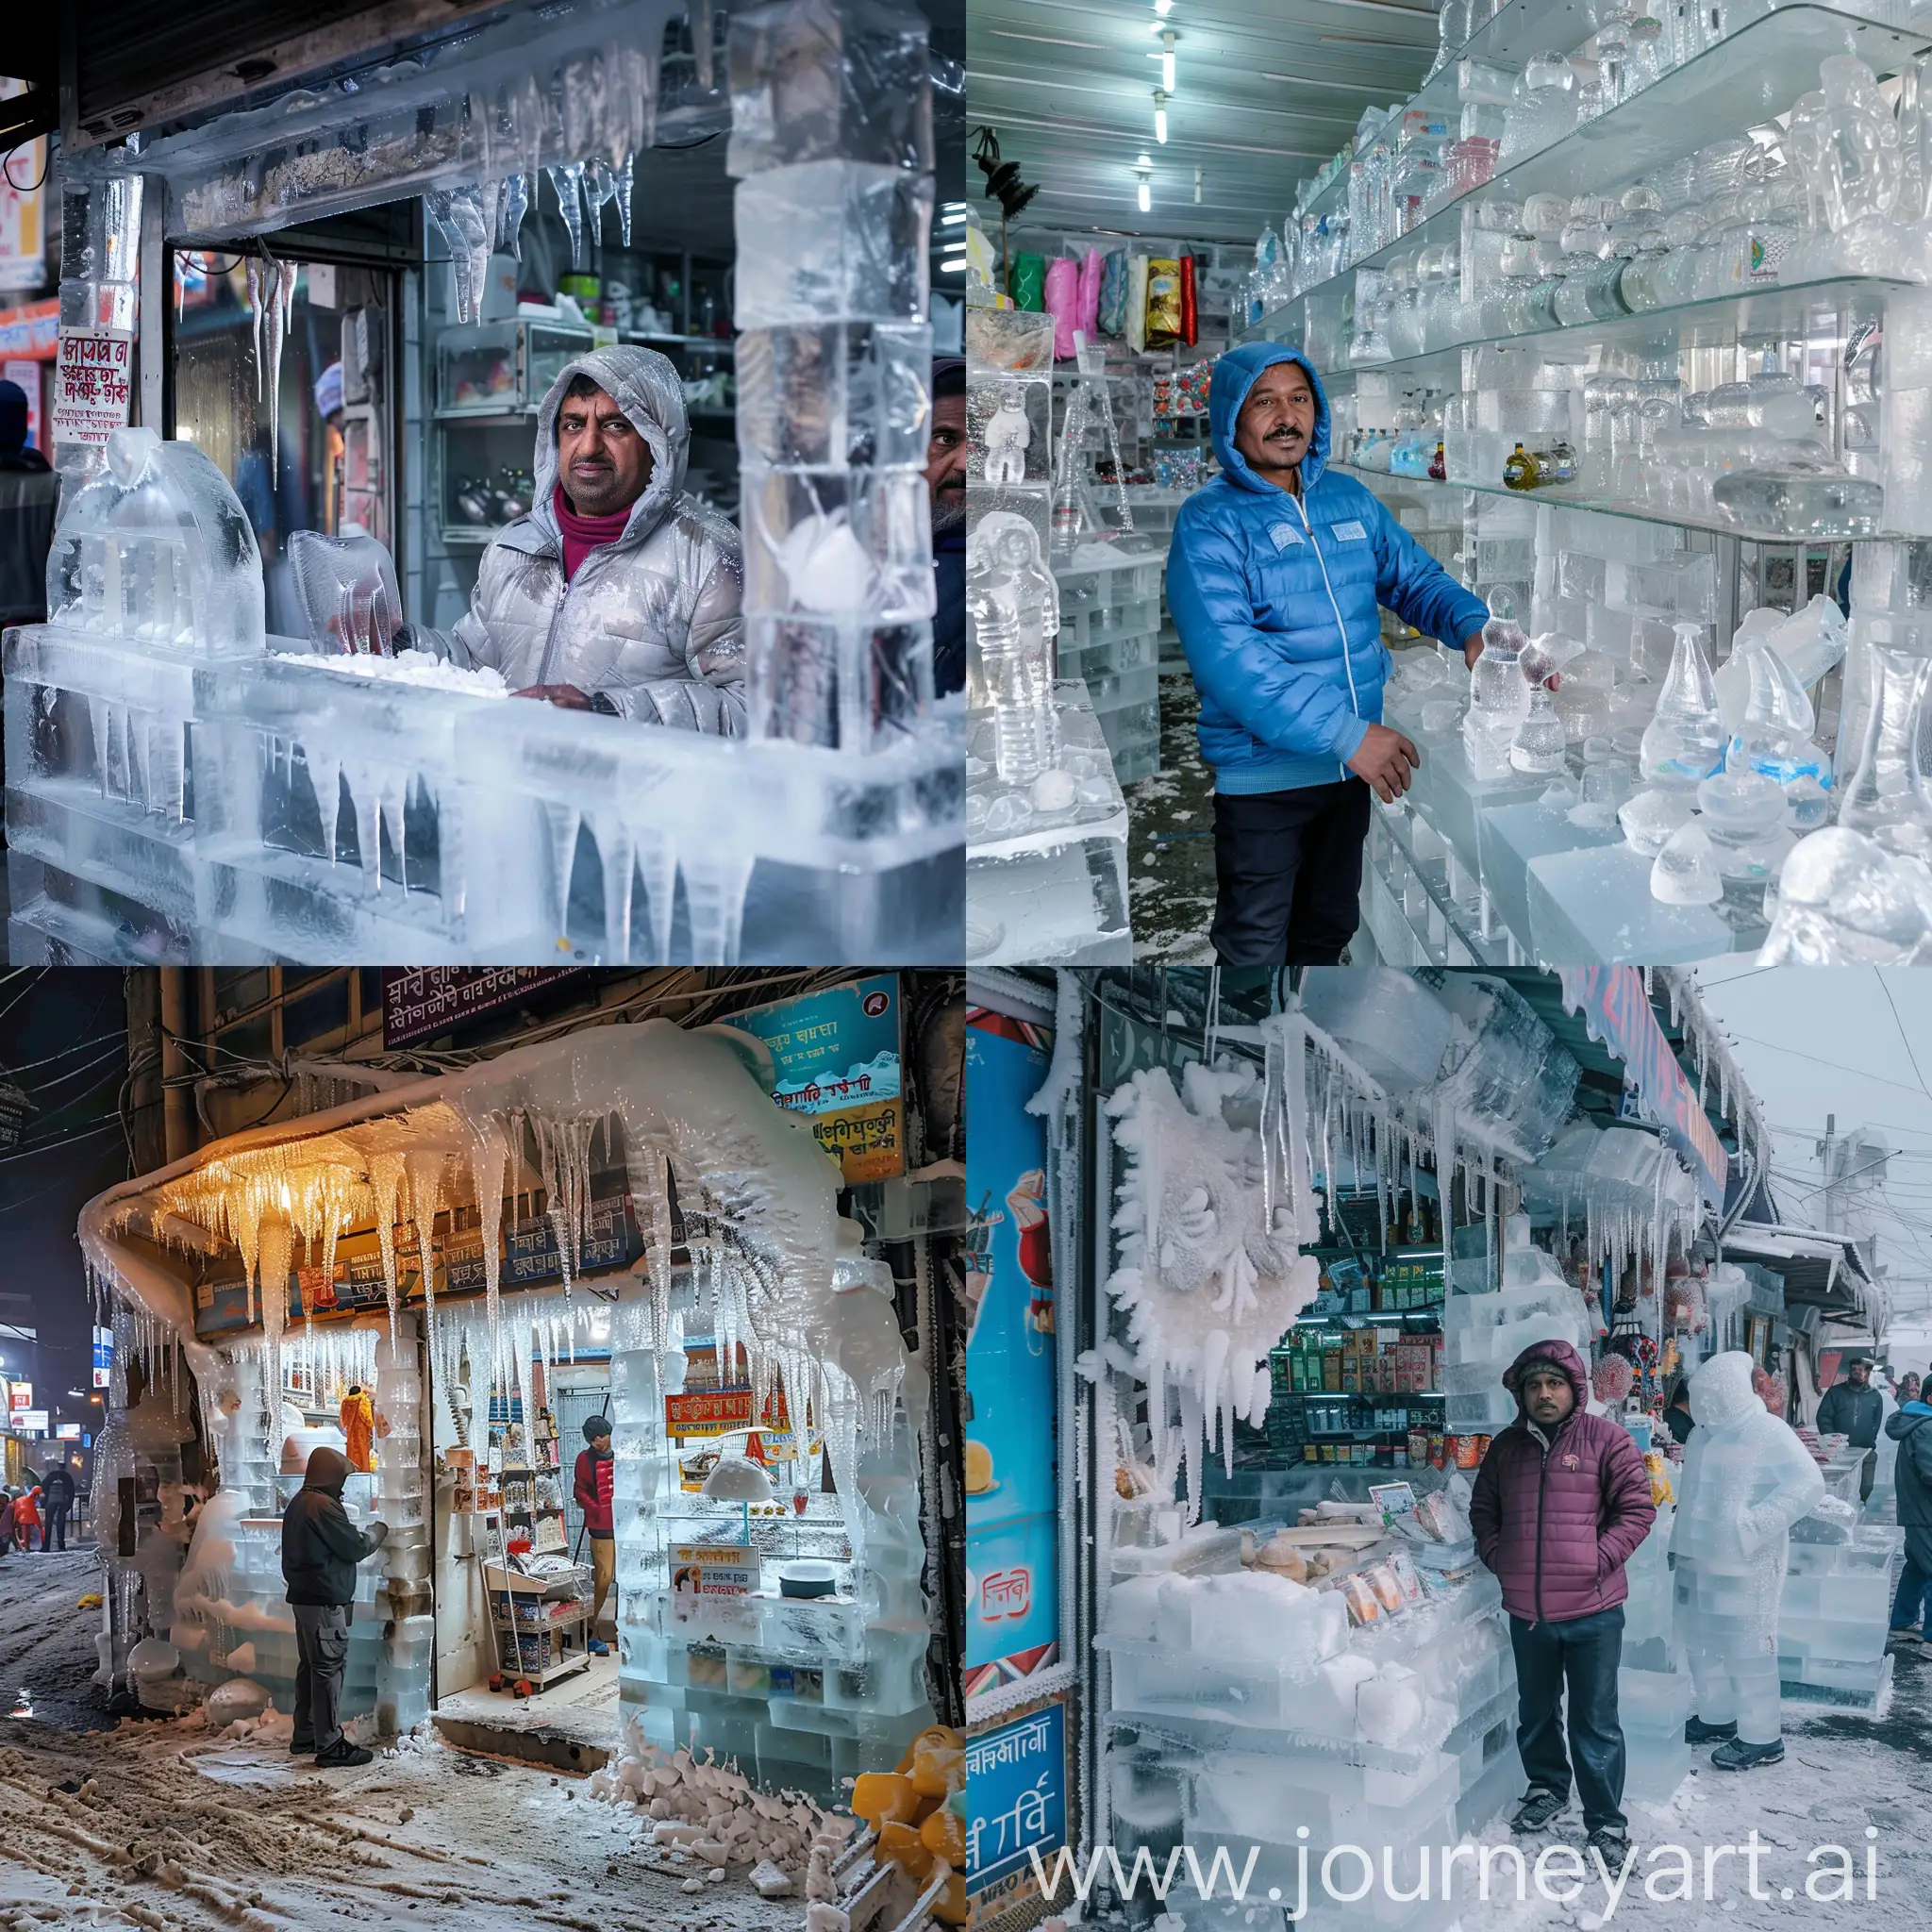 Frozen-Cityscape-Kolkatas-IceClad-Streets-and-Icy-Fashion